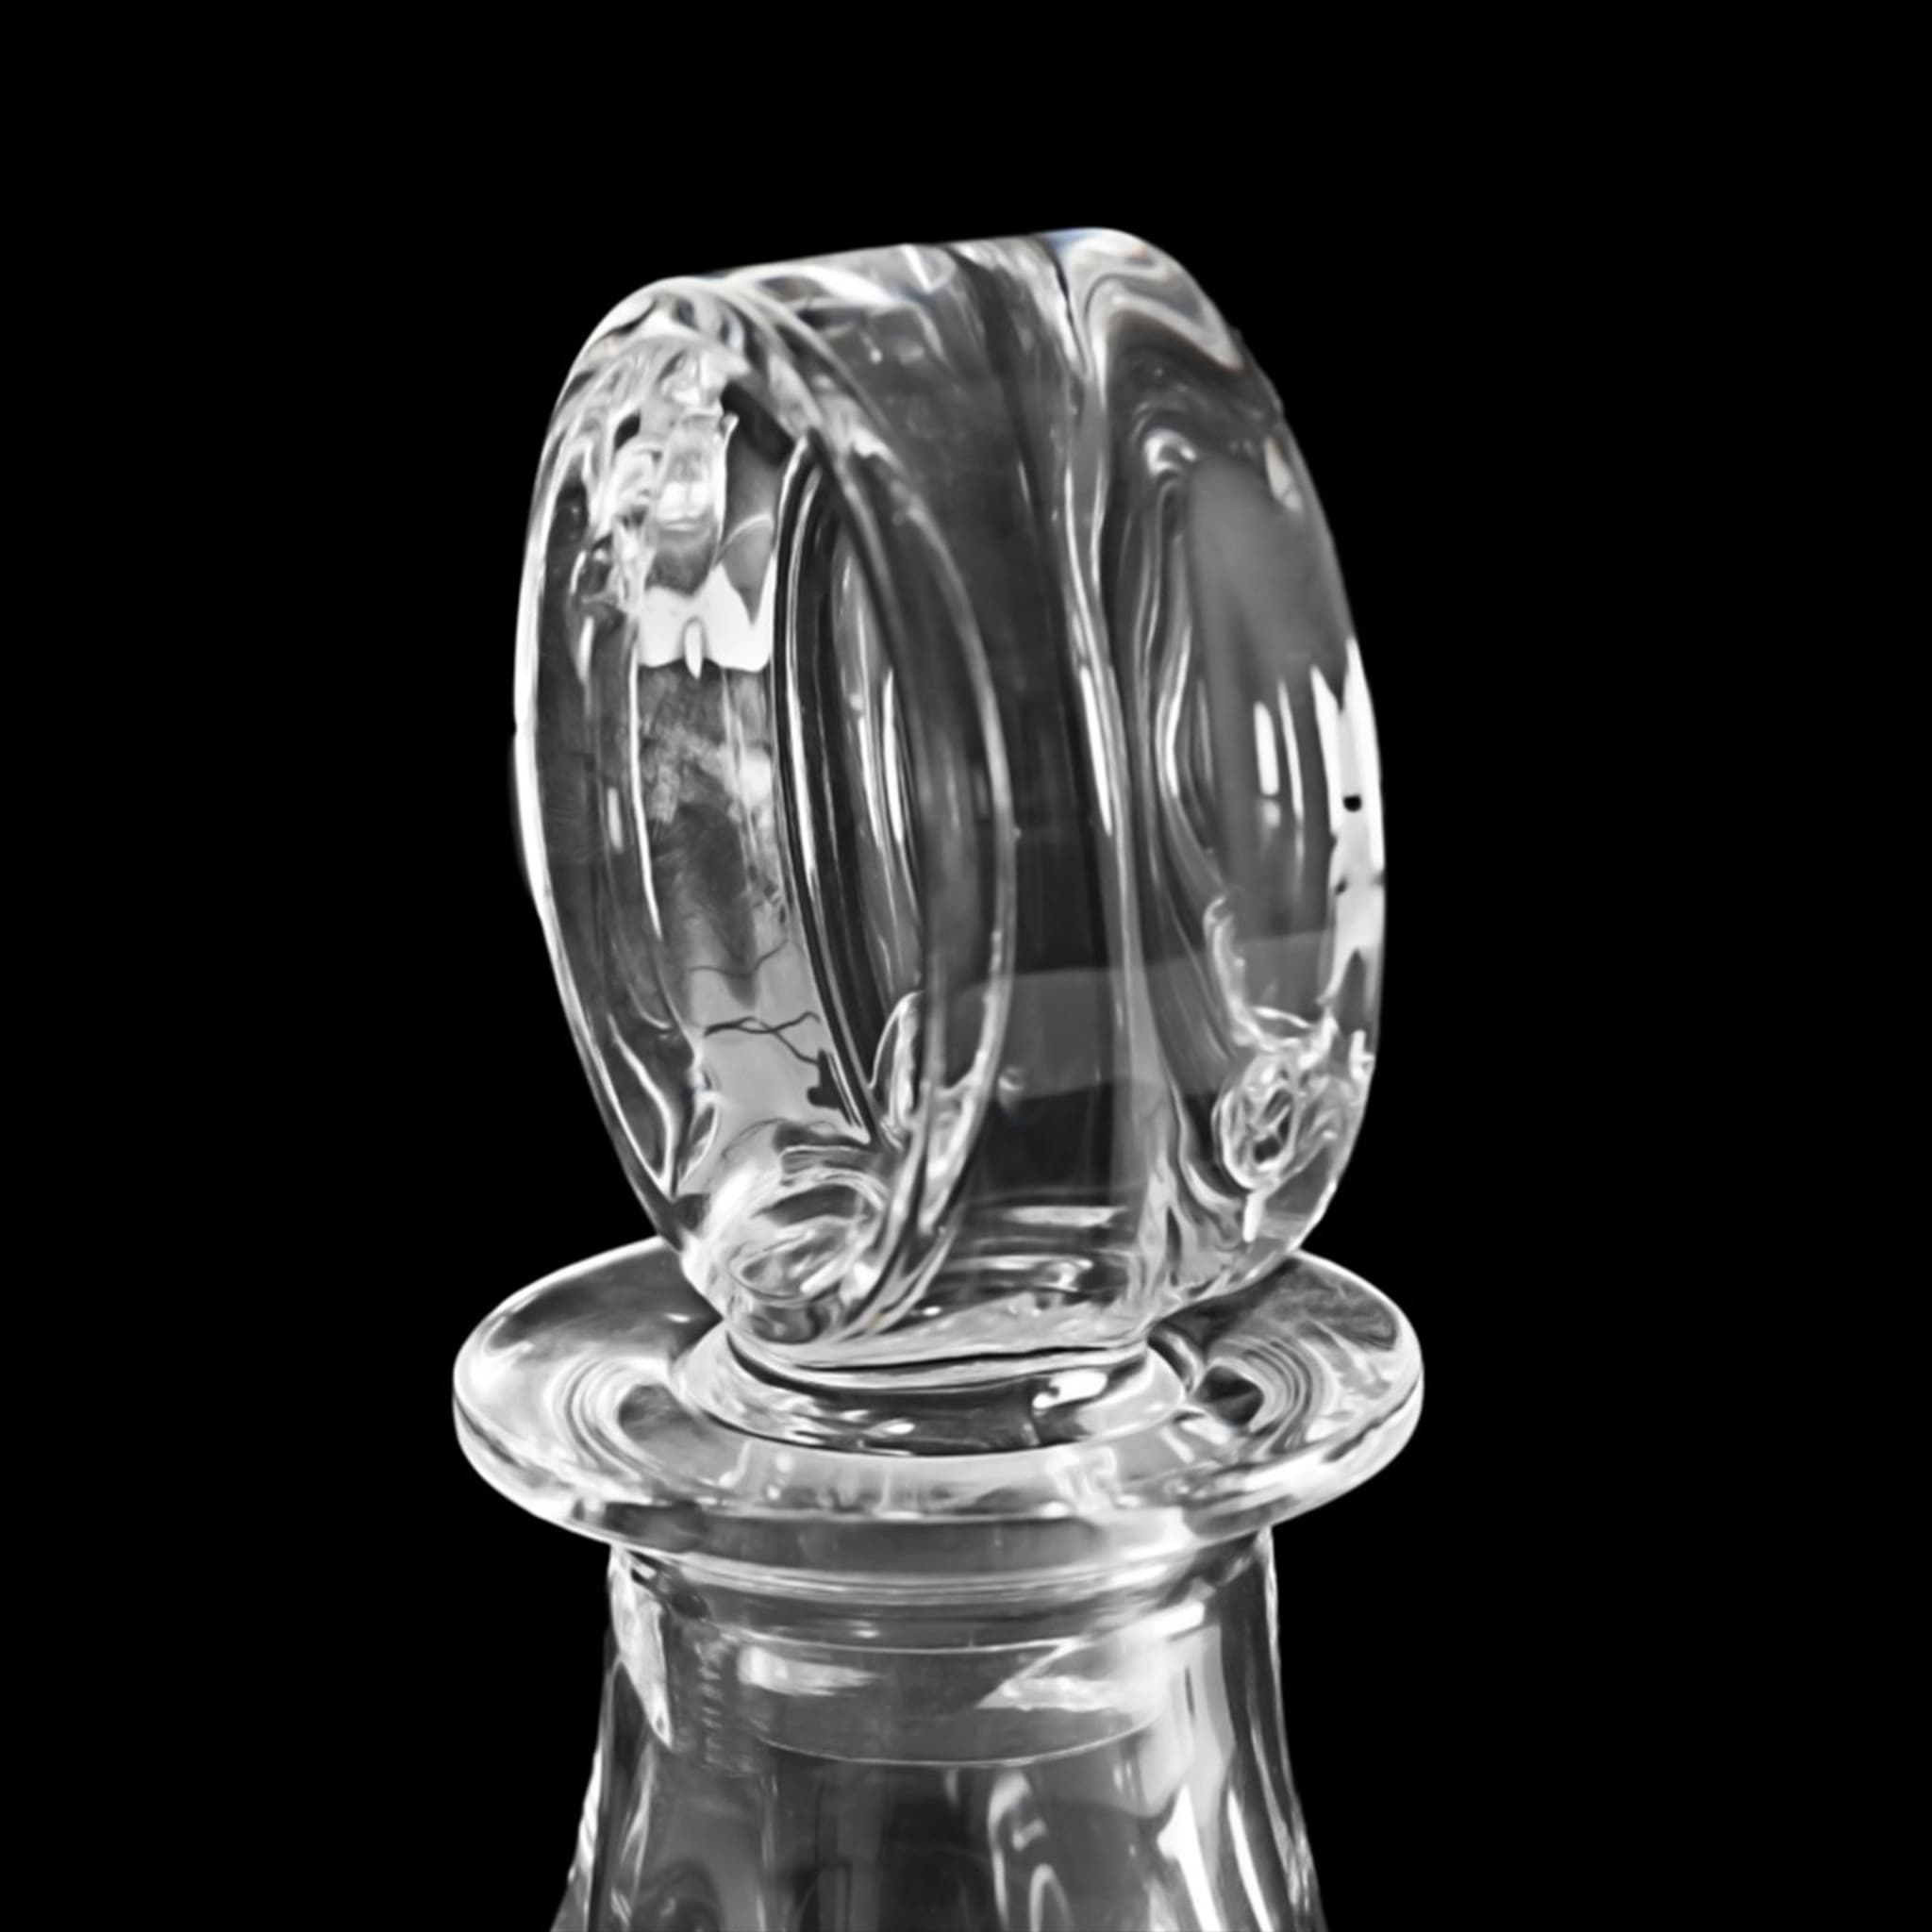 Cubo Crystal Whisky Bottle - Alternative view 4